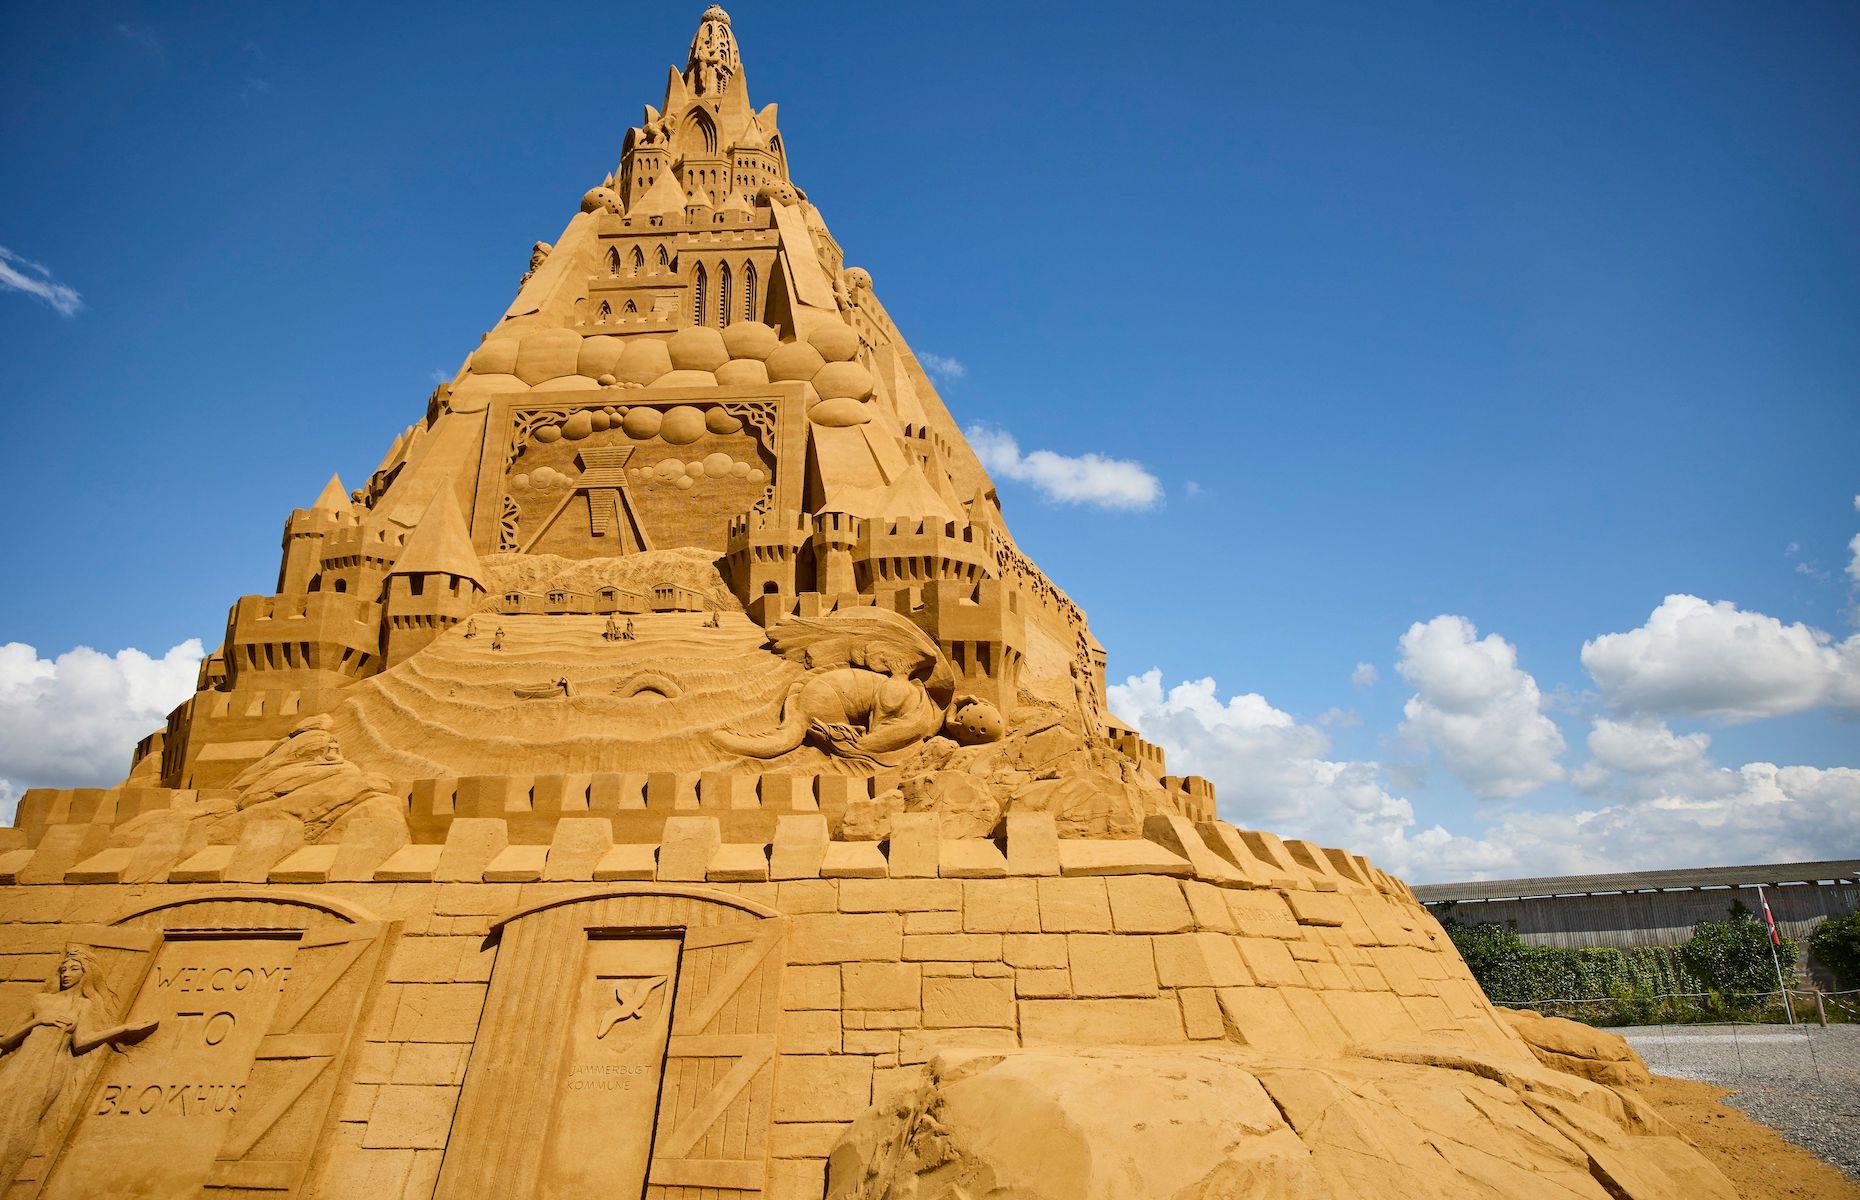 <p>But the Germans’ world sandcastle domination was soon to crumble away. They were pipped to the post this year by Dutch designer Wilfred Stijger who constructed the world's tallest sand sculpture in Blokhus, Denmark. Towering above the little seaside town at just over 69-feet (21.16m) high, the intricate castle is more than 10 feet (3m) taller than the 2019 record-breaker. Rather fittingly, at the top of the pyramid-like structure, which took 4,860 tons of sand to make, is a model of coronavirus wearing a crown, representing the virus’ control over our lives. </p>  <p><strong><a href="https://www.loveexploring.com/galleries/82867/the-worlds-most-jaw-dropping-sculptures-and-statues?page=1">See more of the world's statues and sculptures here</a></strong></p>